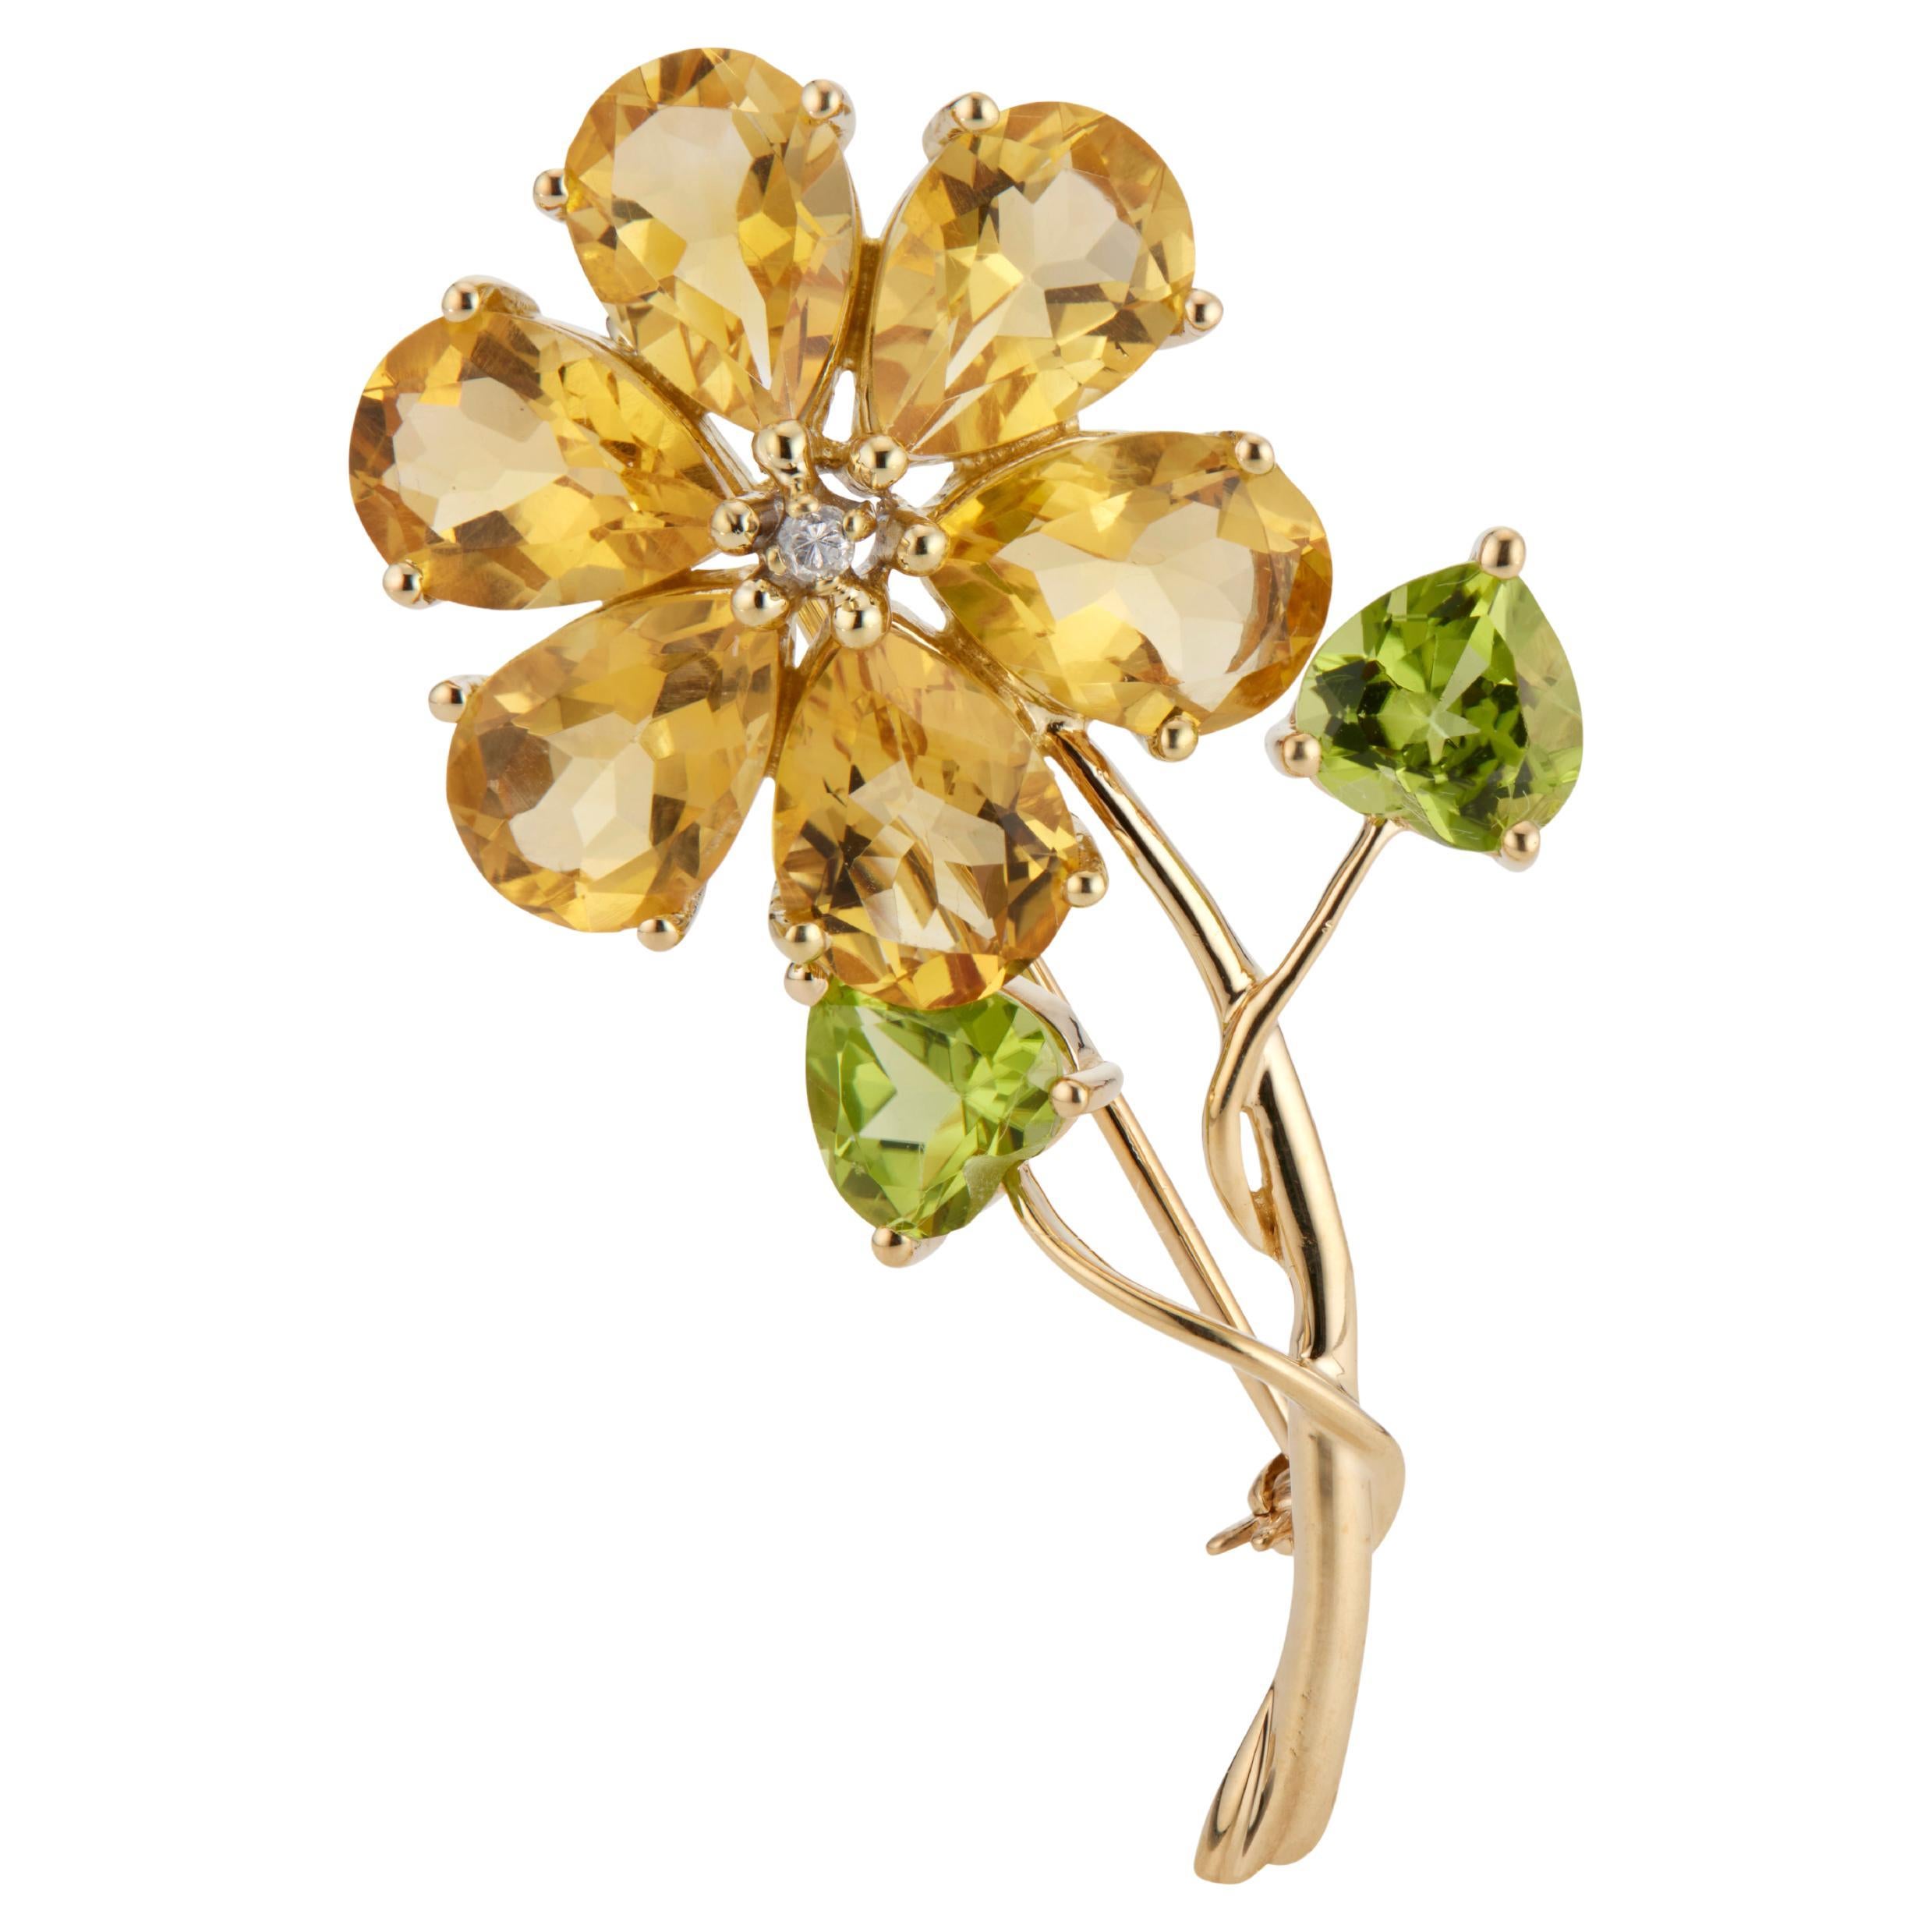 Peridot, diamond and citrine flower brooch. 6 pear shaped citrines with a round diamond center stone set in 14k yellow gold with two heart shaped peridots. 

6 pear shape brownish orange citrines, approx. 10cts
2 heart shape green peridot, approx.